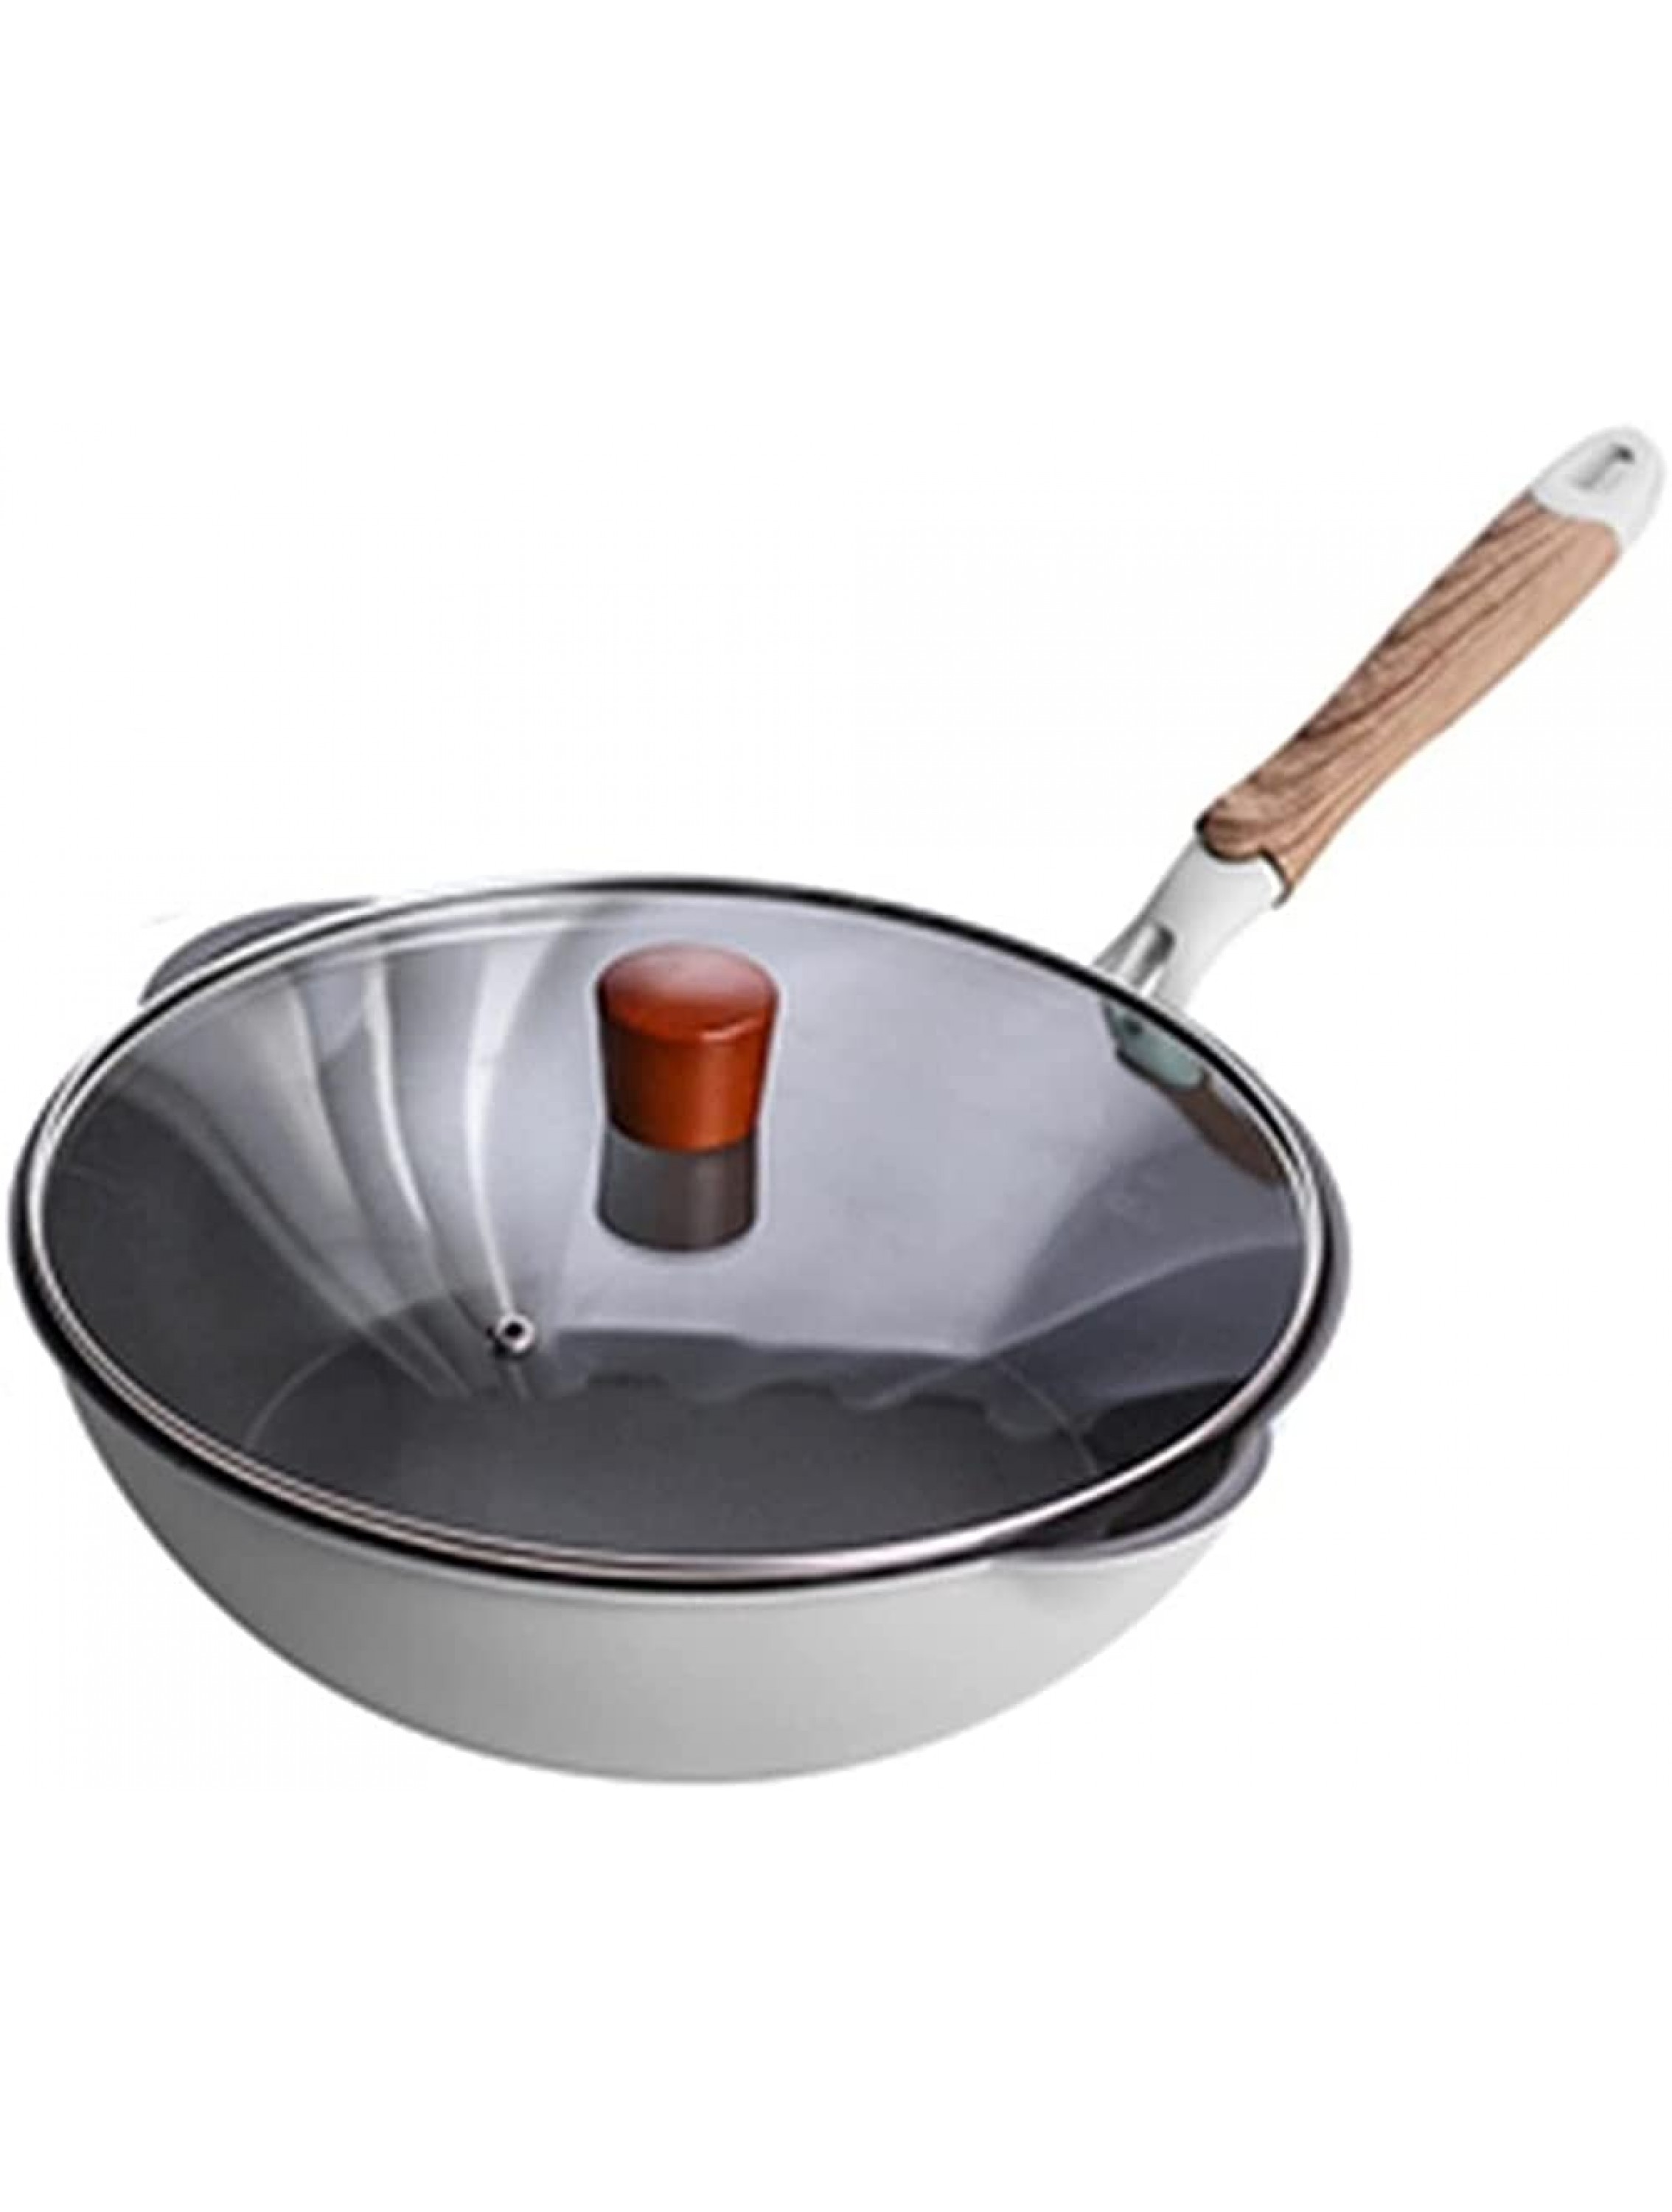 SHUOG Thick Non-stick Wok No Oil Smoke Household Frying Pan With Handle Wok Gas Stove Induction Cooker Special Pan Large Cooking Pot Chef's Pans Color : White 28cm with lid - BINJAON4K